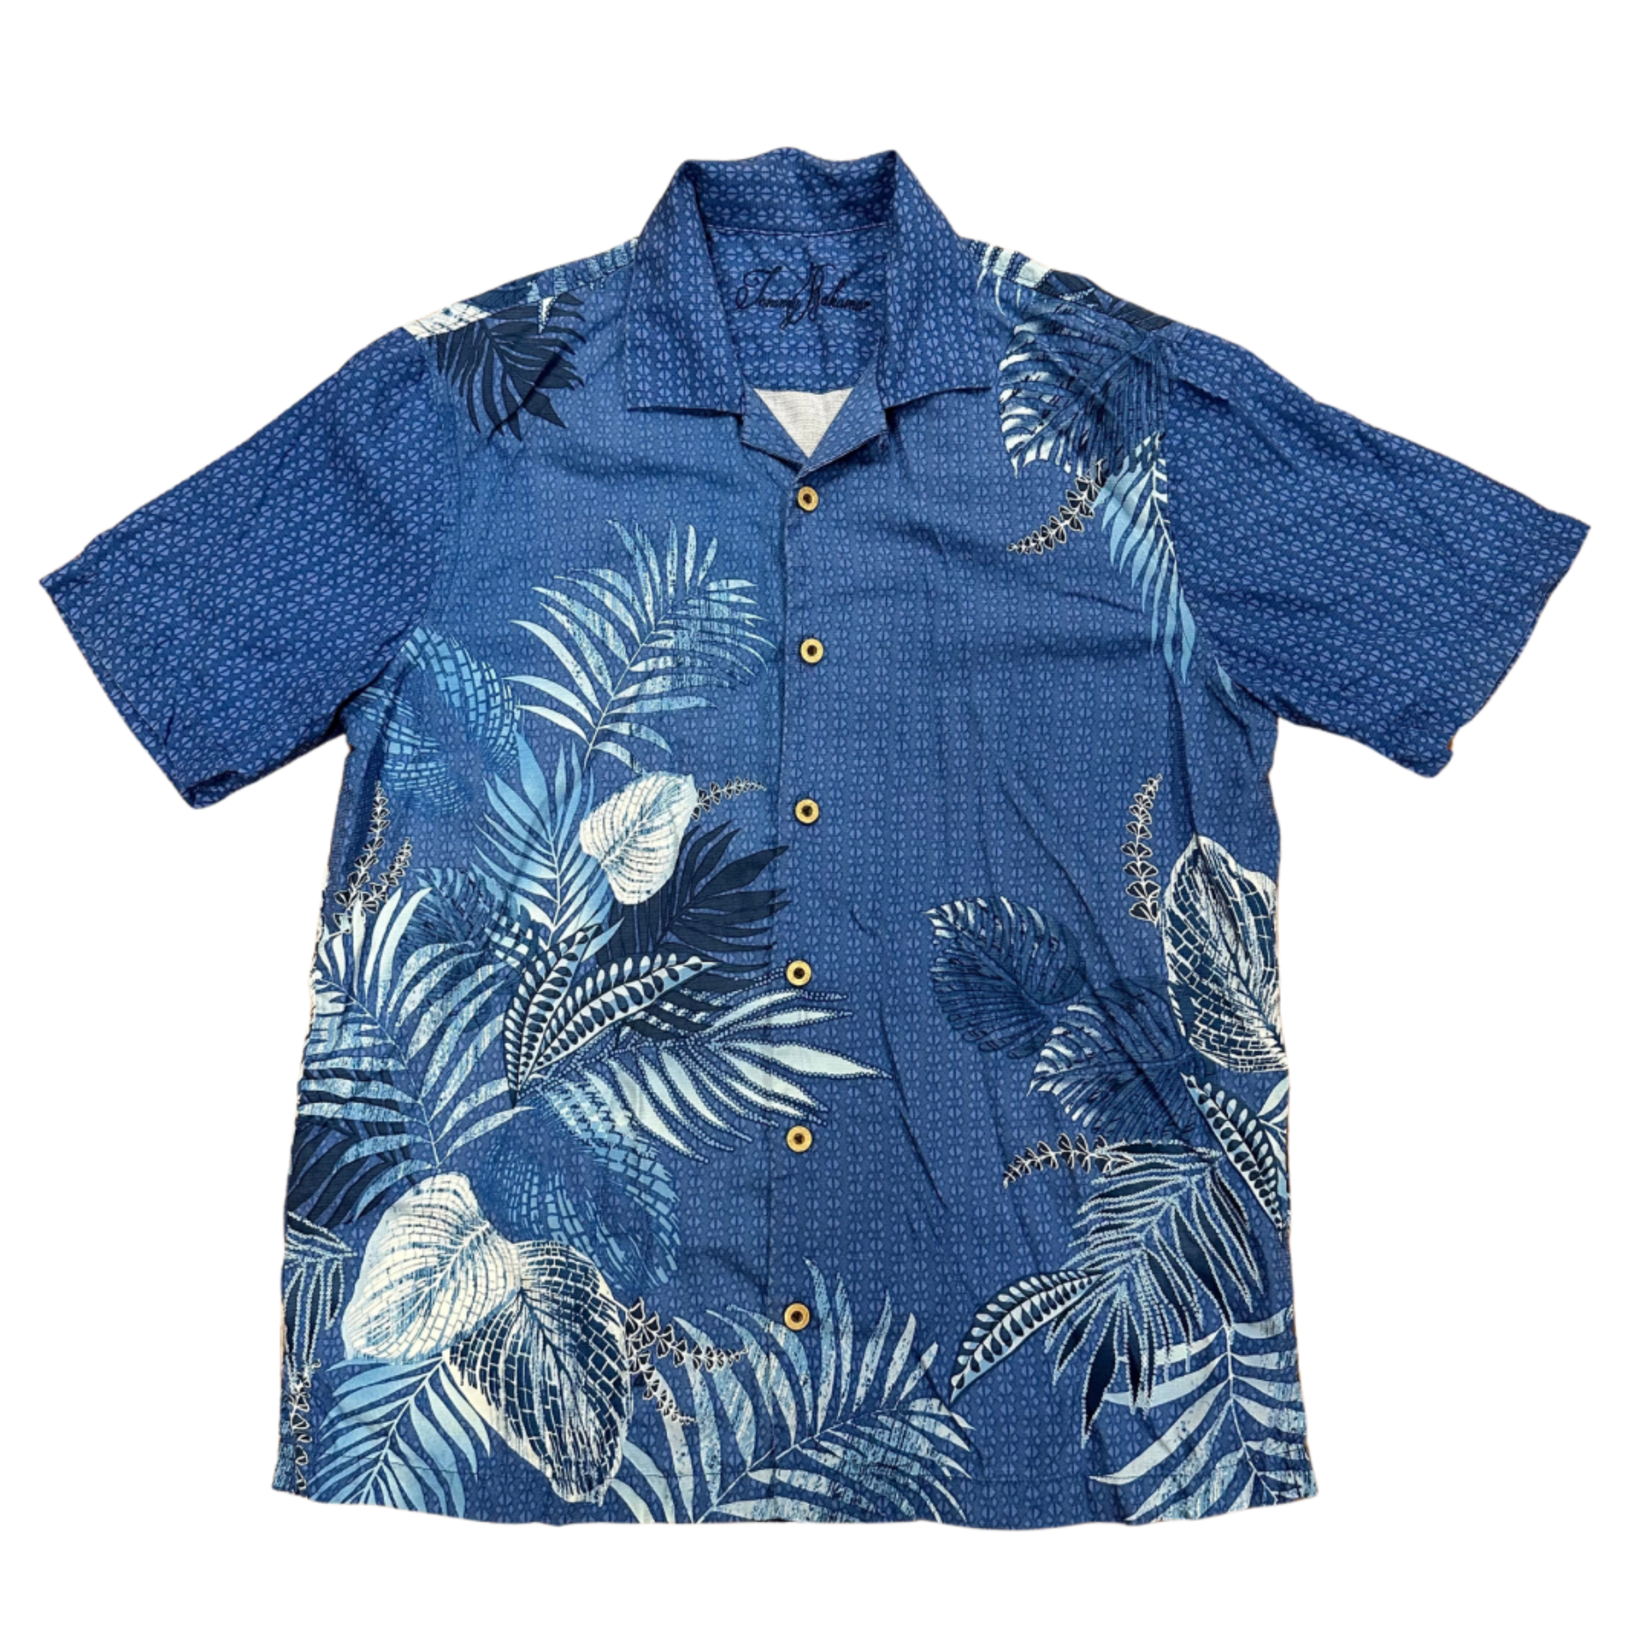 Mission Zero ReLoved Men's Aloha Shirt - Tommy Bahama - 100% Silk - Blue Leaf w/Coconut Buttons - M